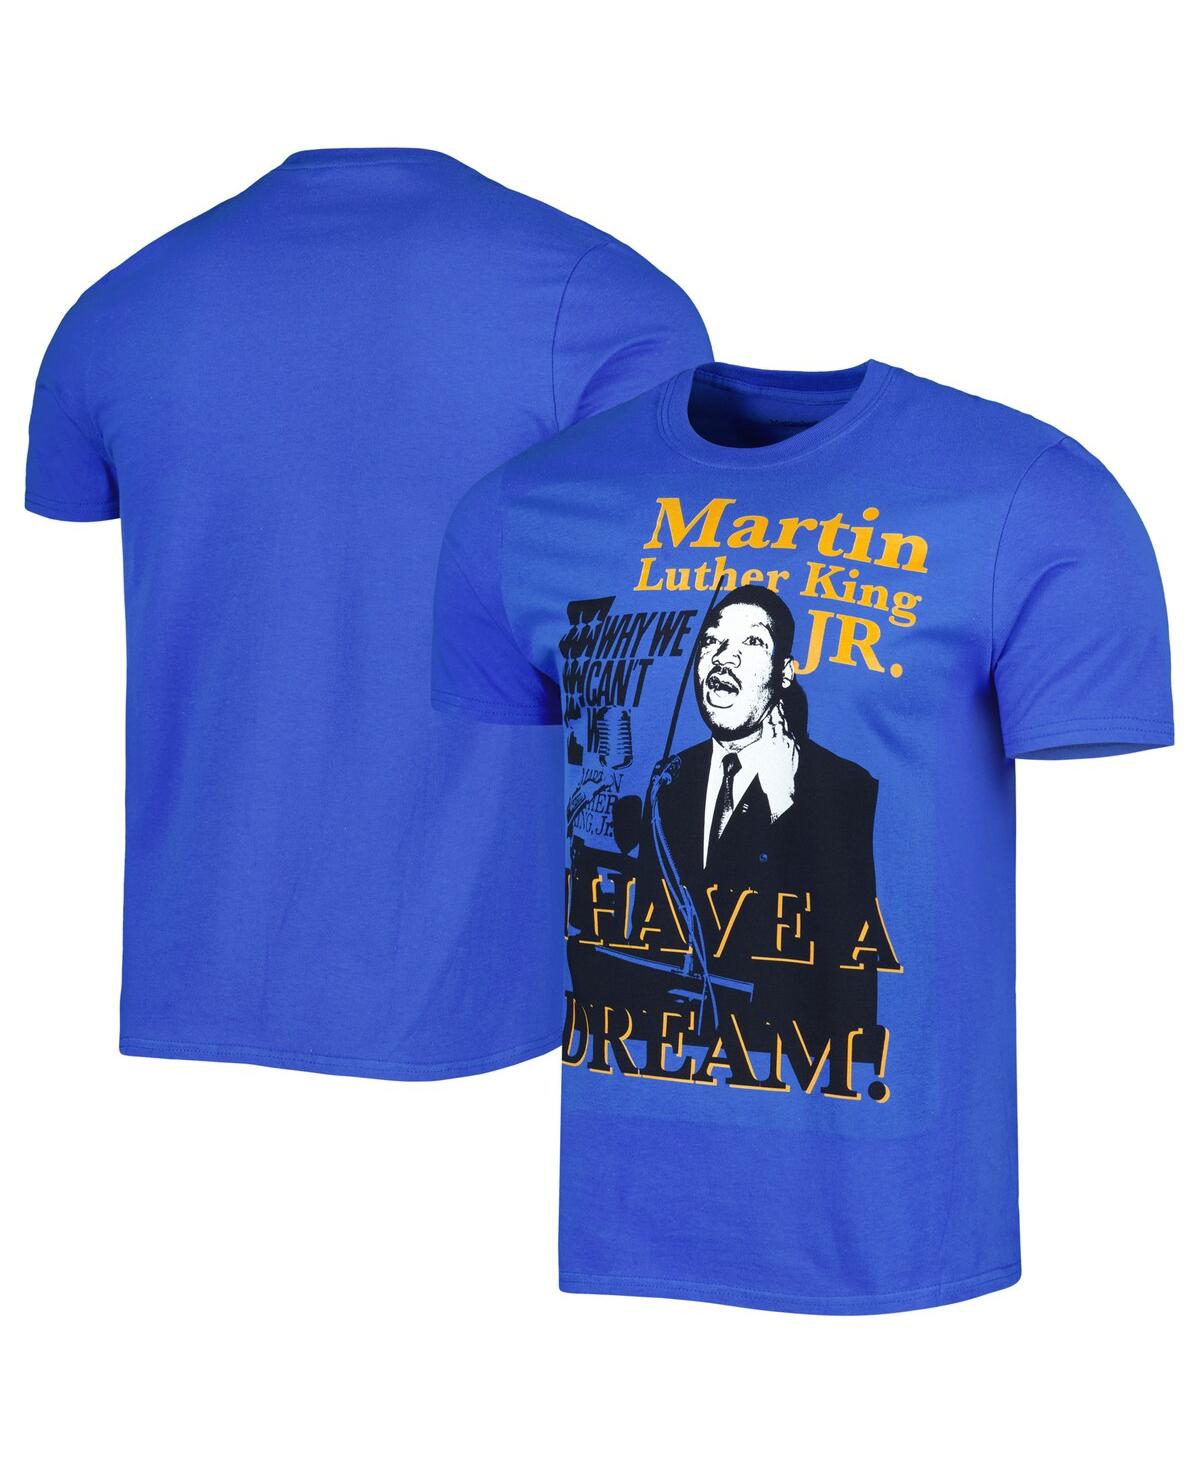 Men's and Women's Blue Martin Luther King Jr. Graphic T-shirt - Blue